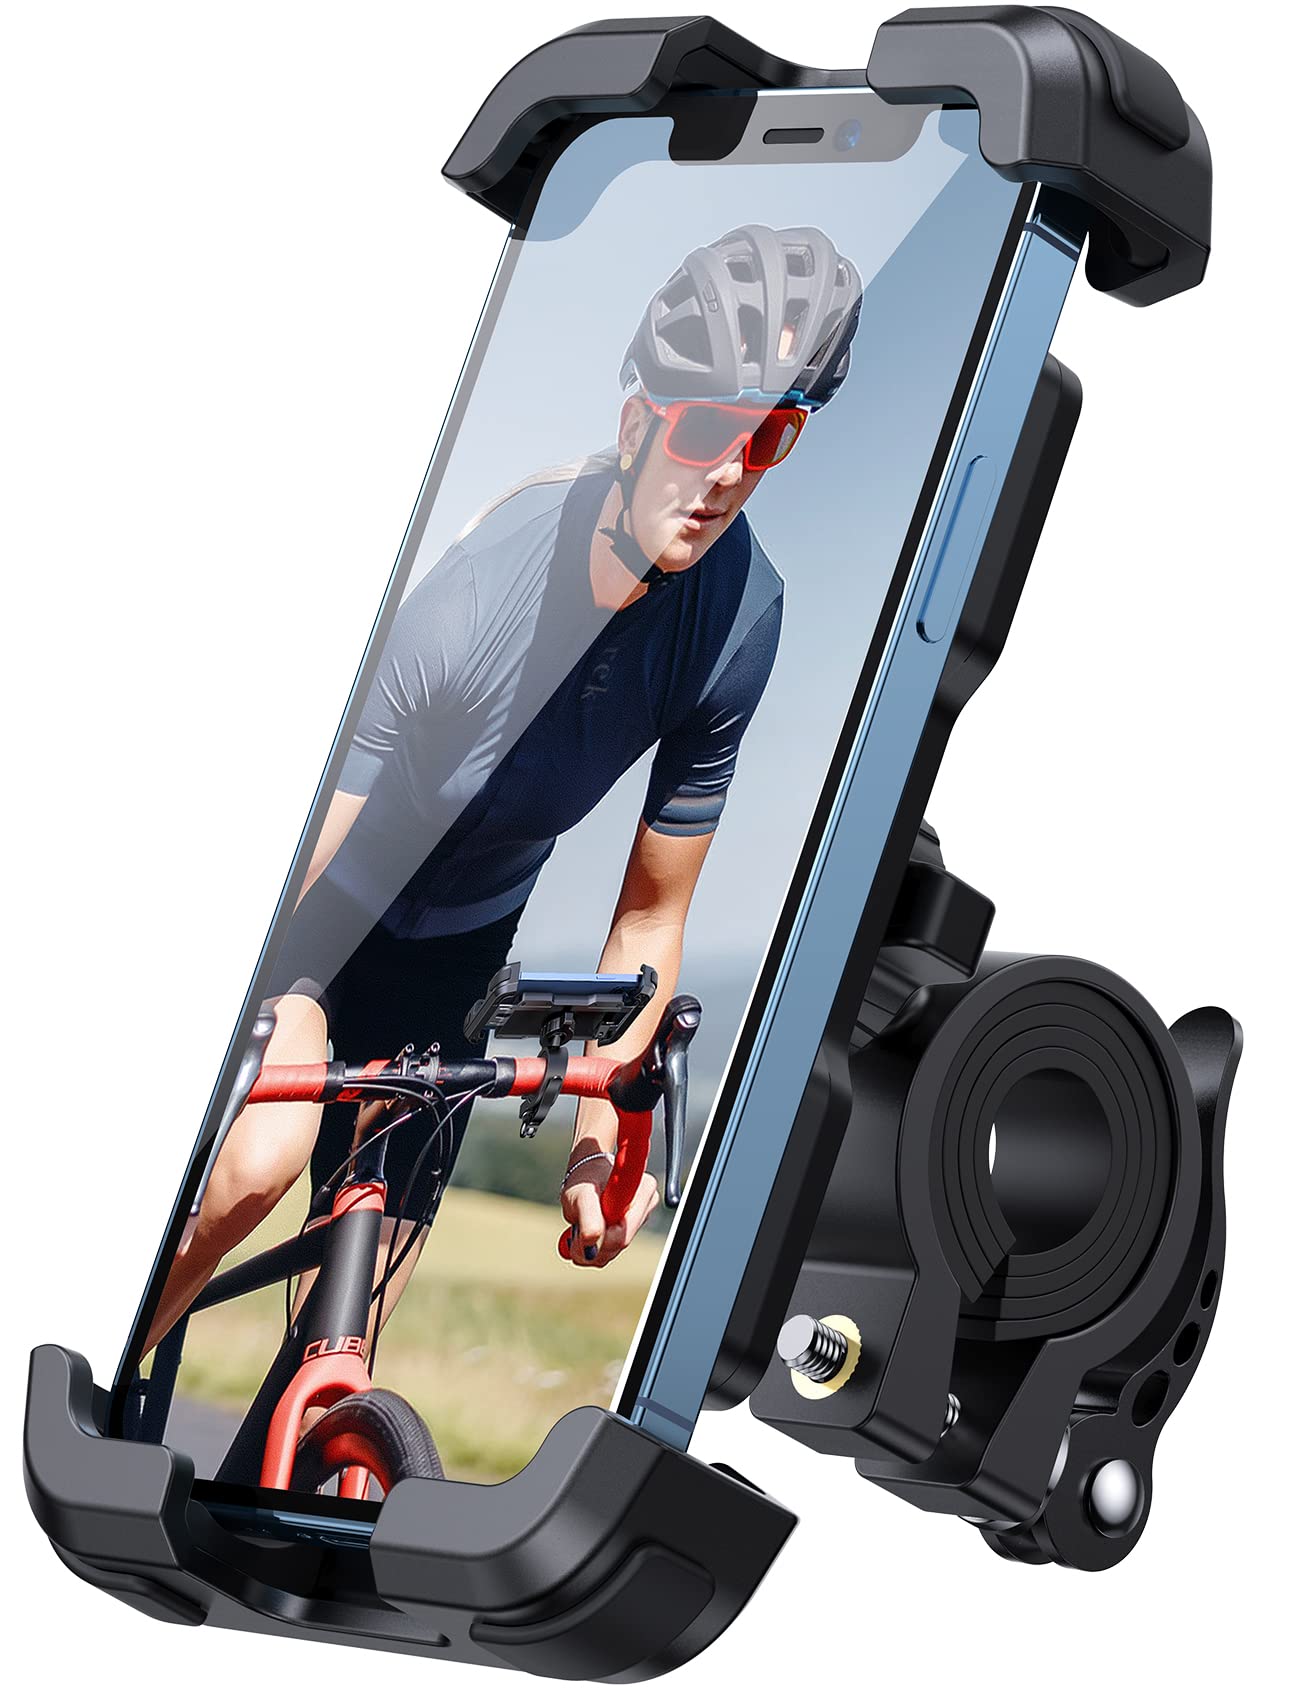 Lamicall Motorcycle Phone Mount, Bike Holder - Upgrade Adjustable Bike Phone Holder Clamp, Bicycle Scooter ATV Handlebar Cradle Clip for iPhone 14 Plus/Pro Max, 13, Galaxy S9 and 4.7 to 6.8